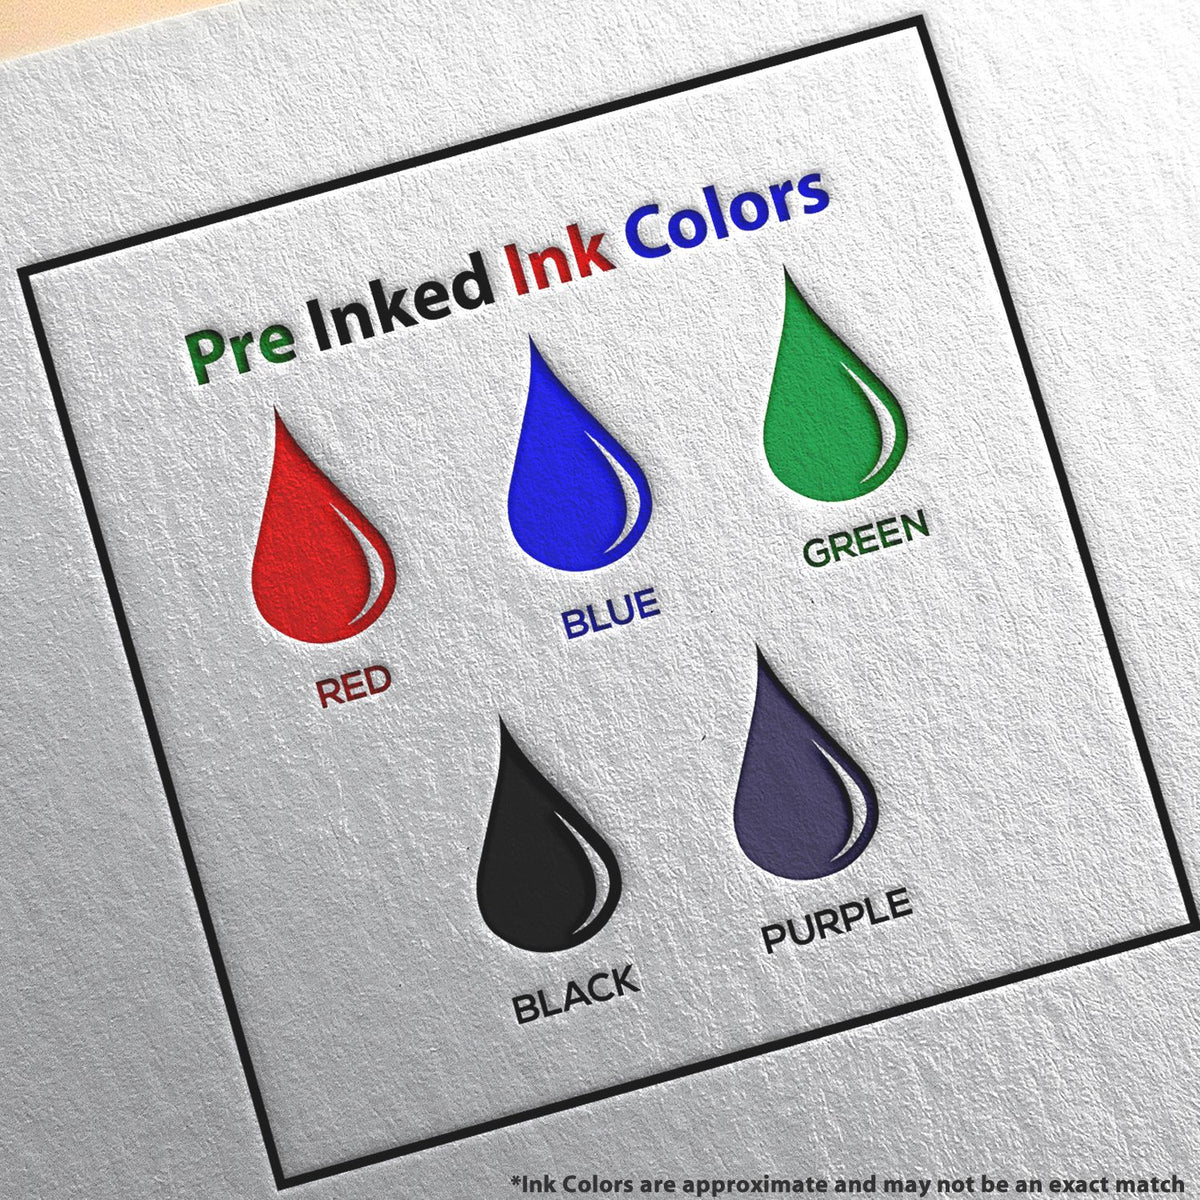 A picture showing the different ink colors or hues available for the Slim Pre-Inked Minnesota Professional Engineer Seal Stamp product.